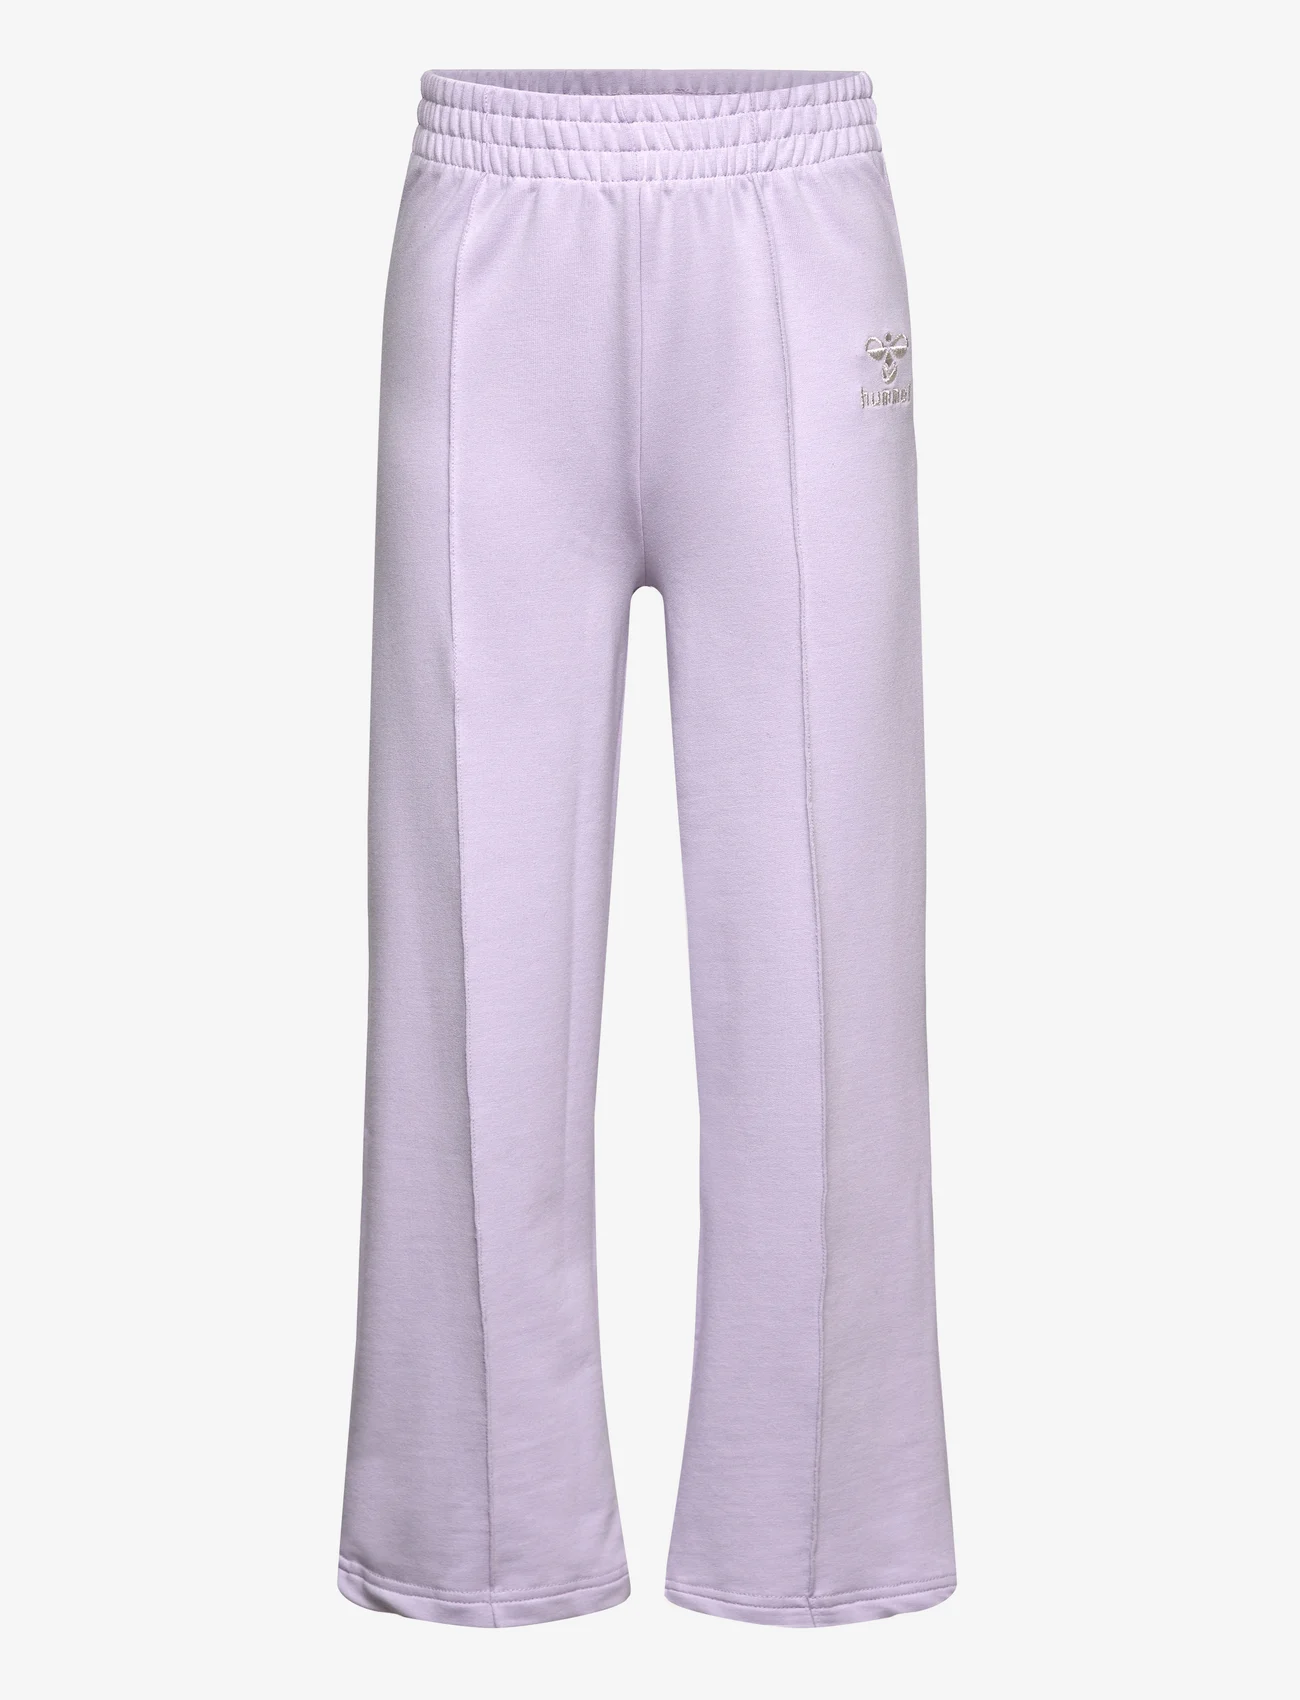 Hummel - hmlELLY PANTS - lowest prices - orchid petal - 0